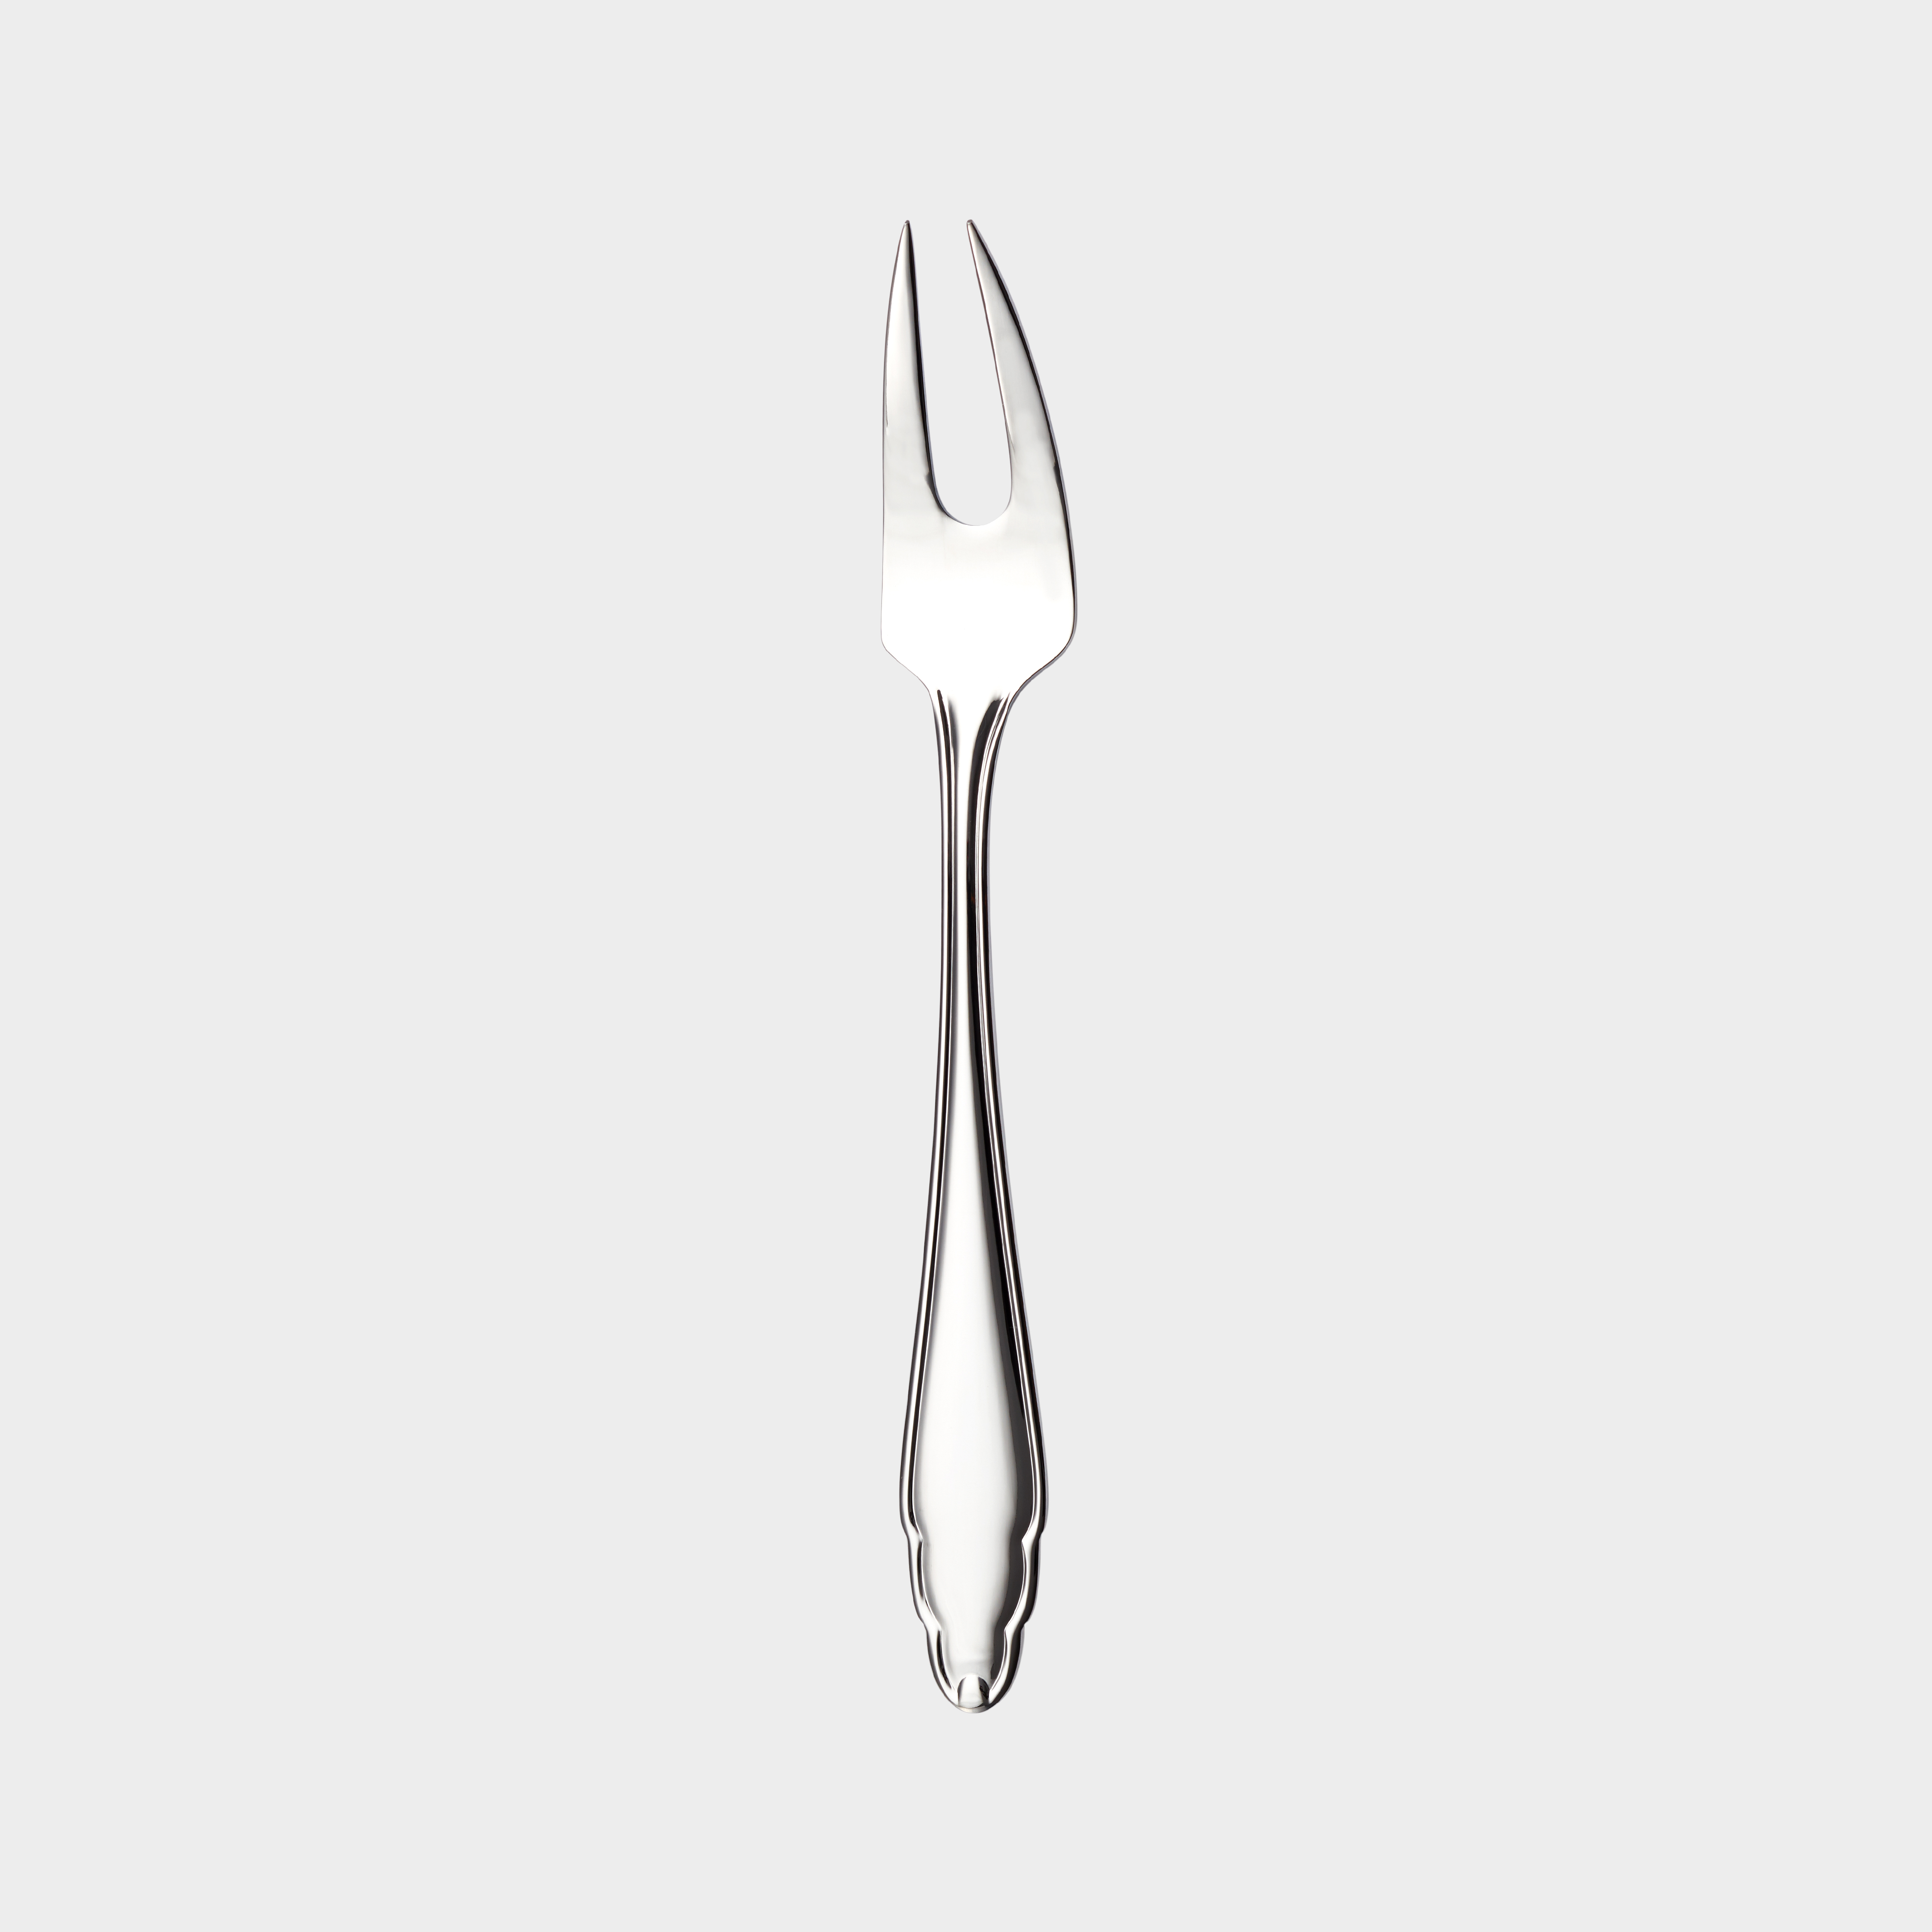 Lunch serving fork product image